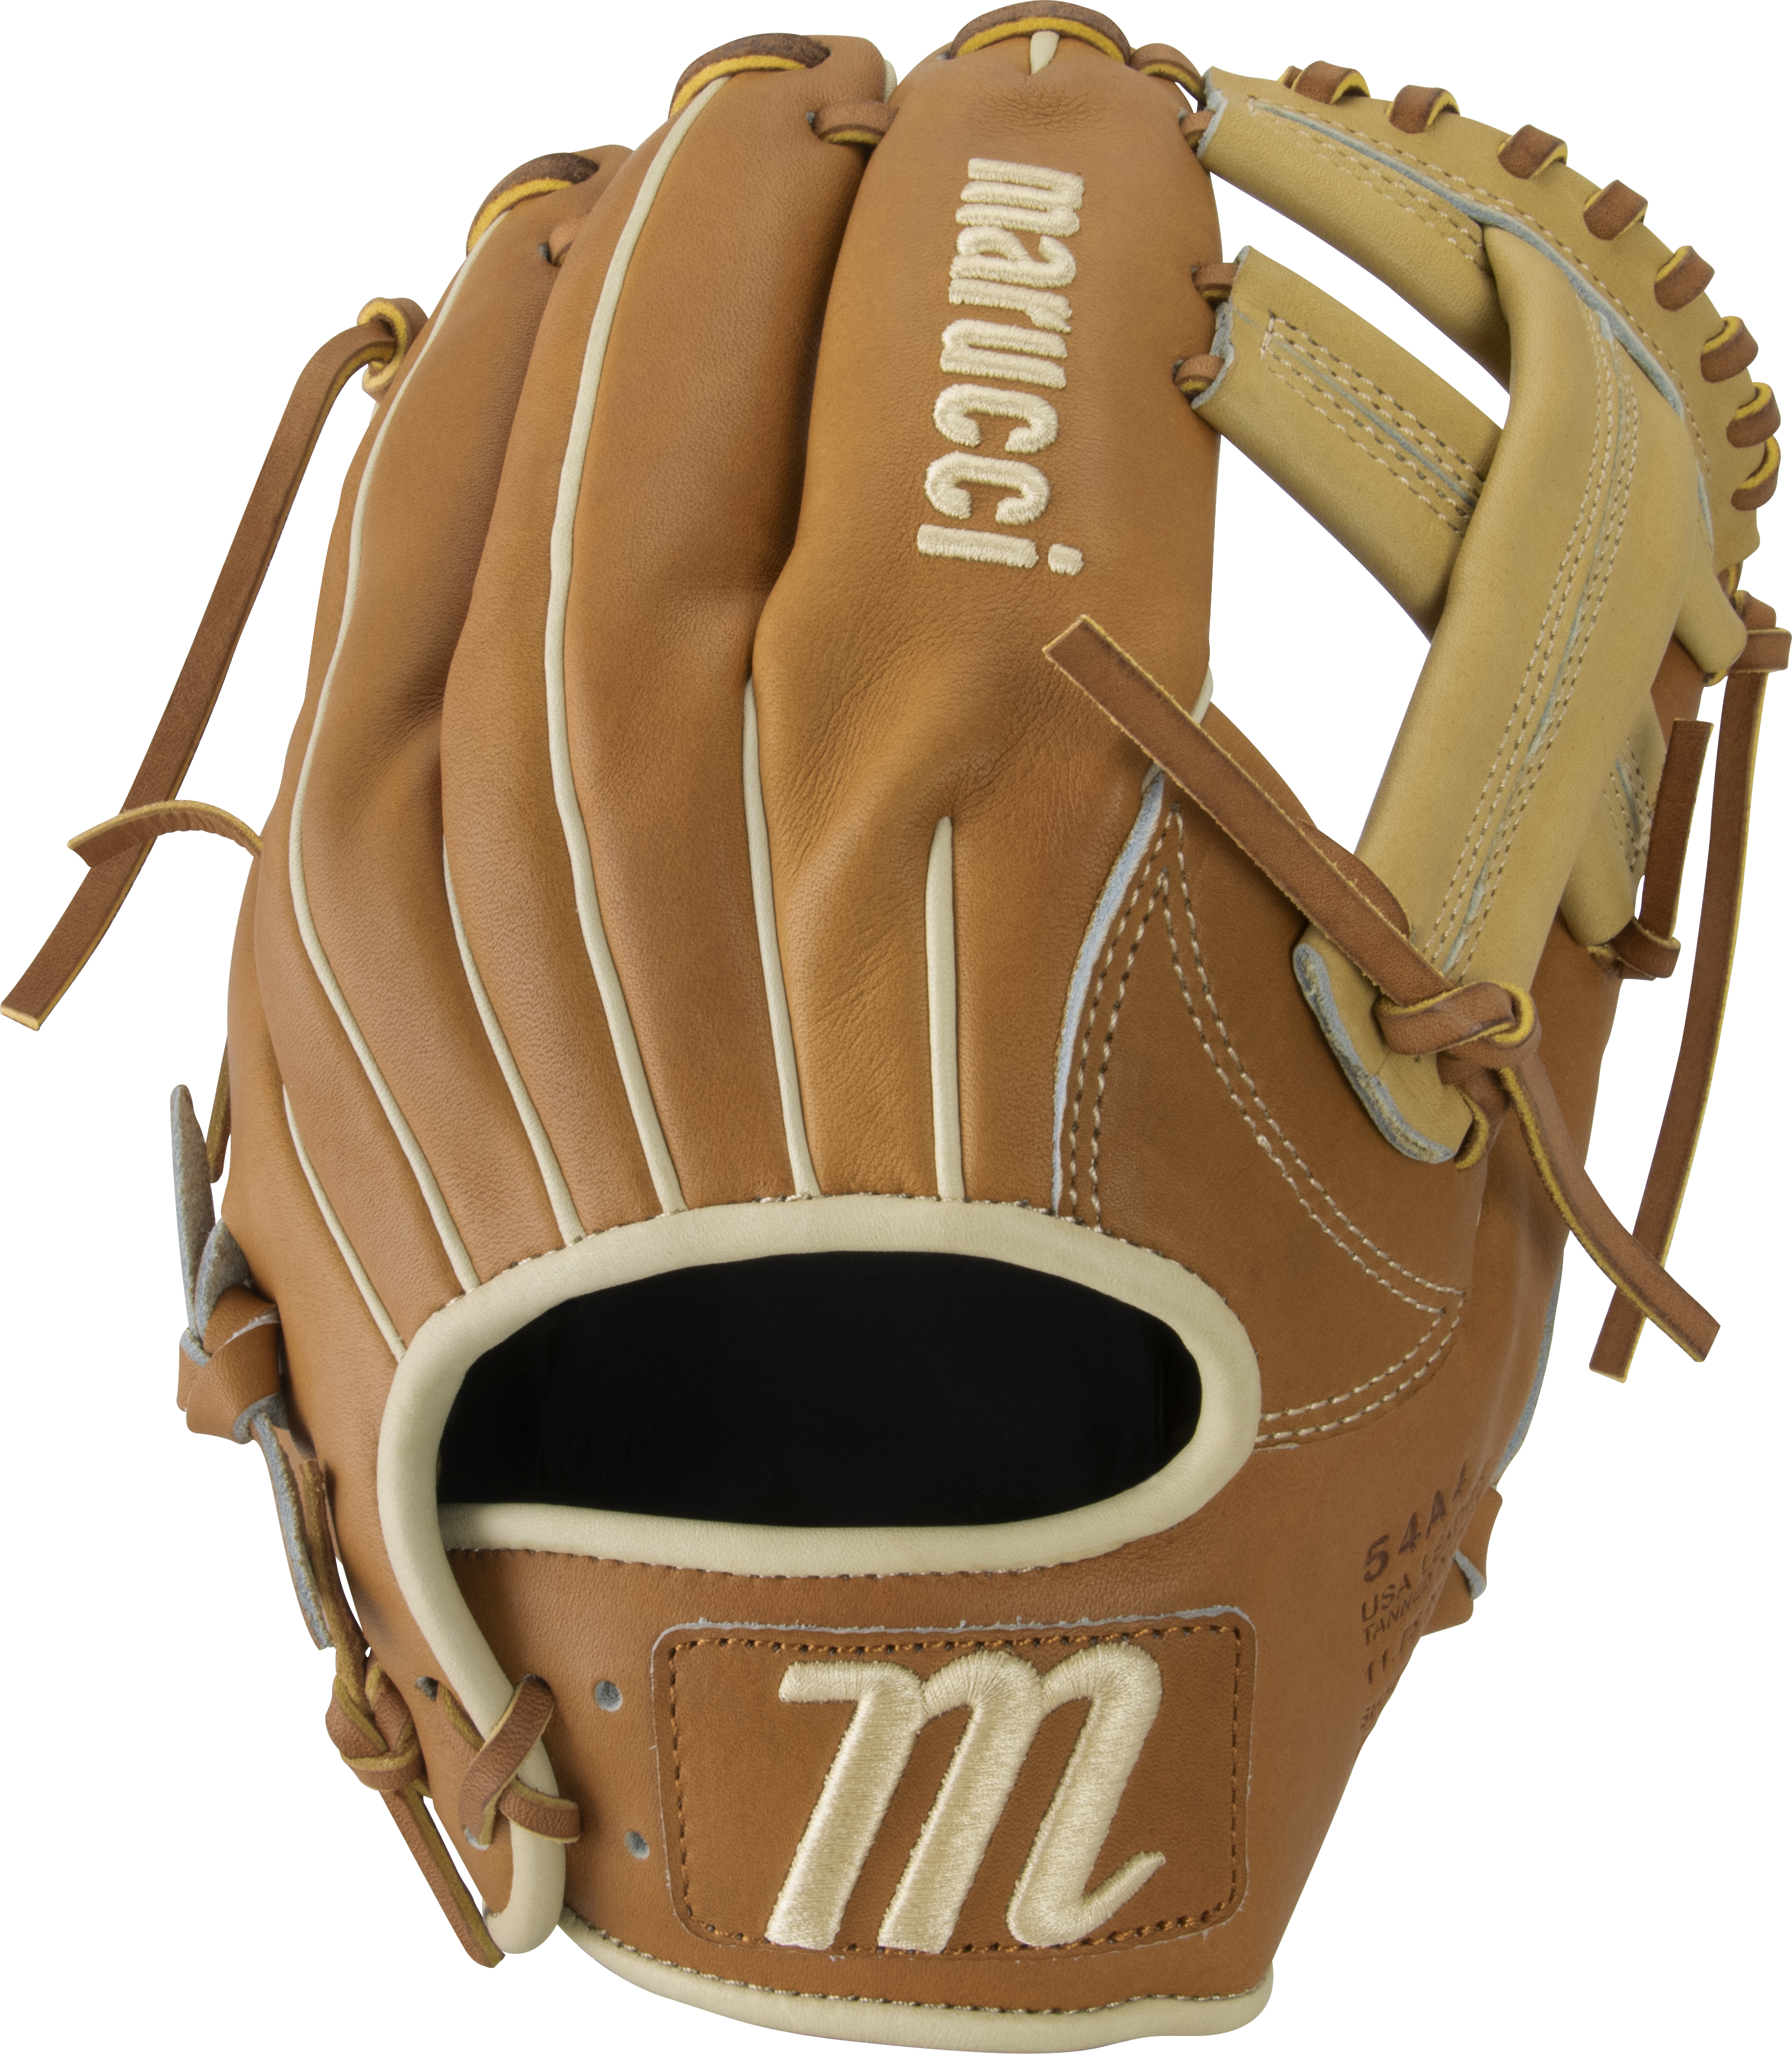 marucci-cypress-11-75-baseball-glove-54a4-single-post-web-right-hand-throw MFGCY54A4-SMTF-RightHandThrow Marucci  849817099377  • Premium Japanese-tanned steerhide leather provides stiffness and rugged durability •